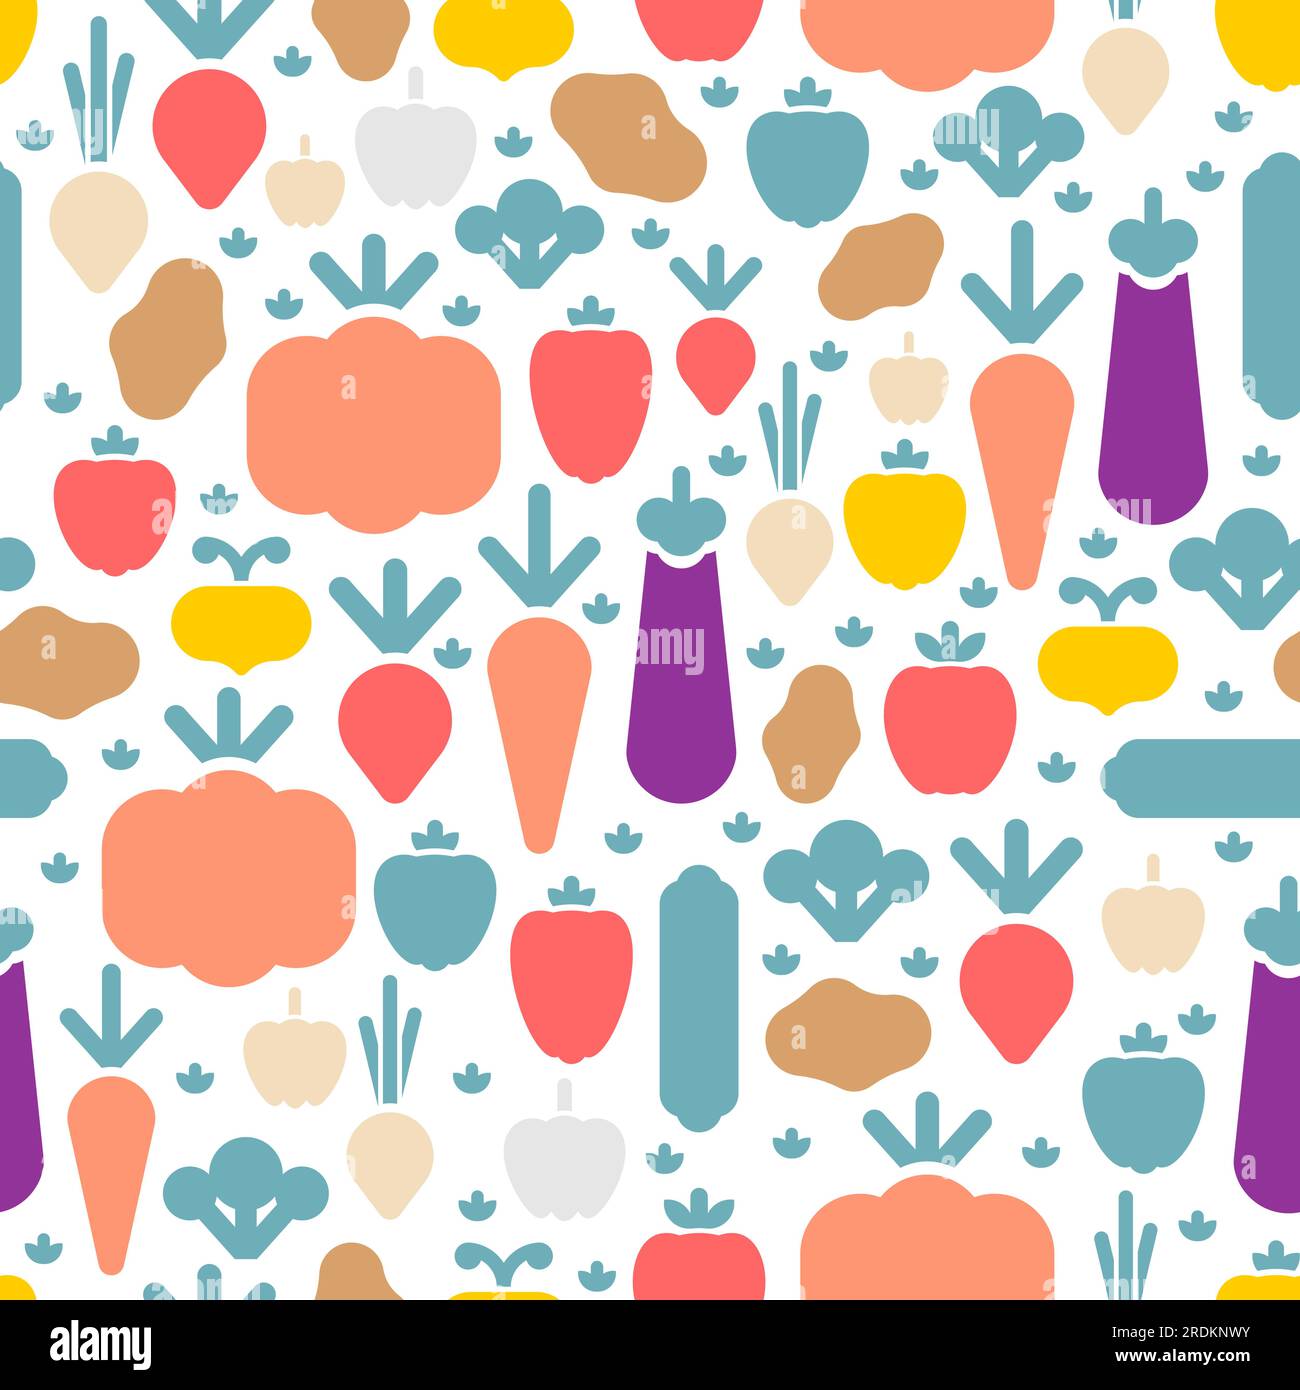 Vegetables pattern seamless. Vegetable set background. Eggplant and potatoes. Pumpkin and turnip. Radish and tomato. Garlic and carrot signs Stock Vector